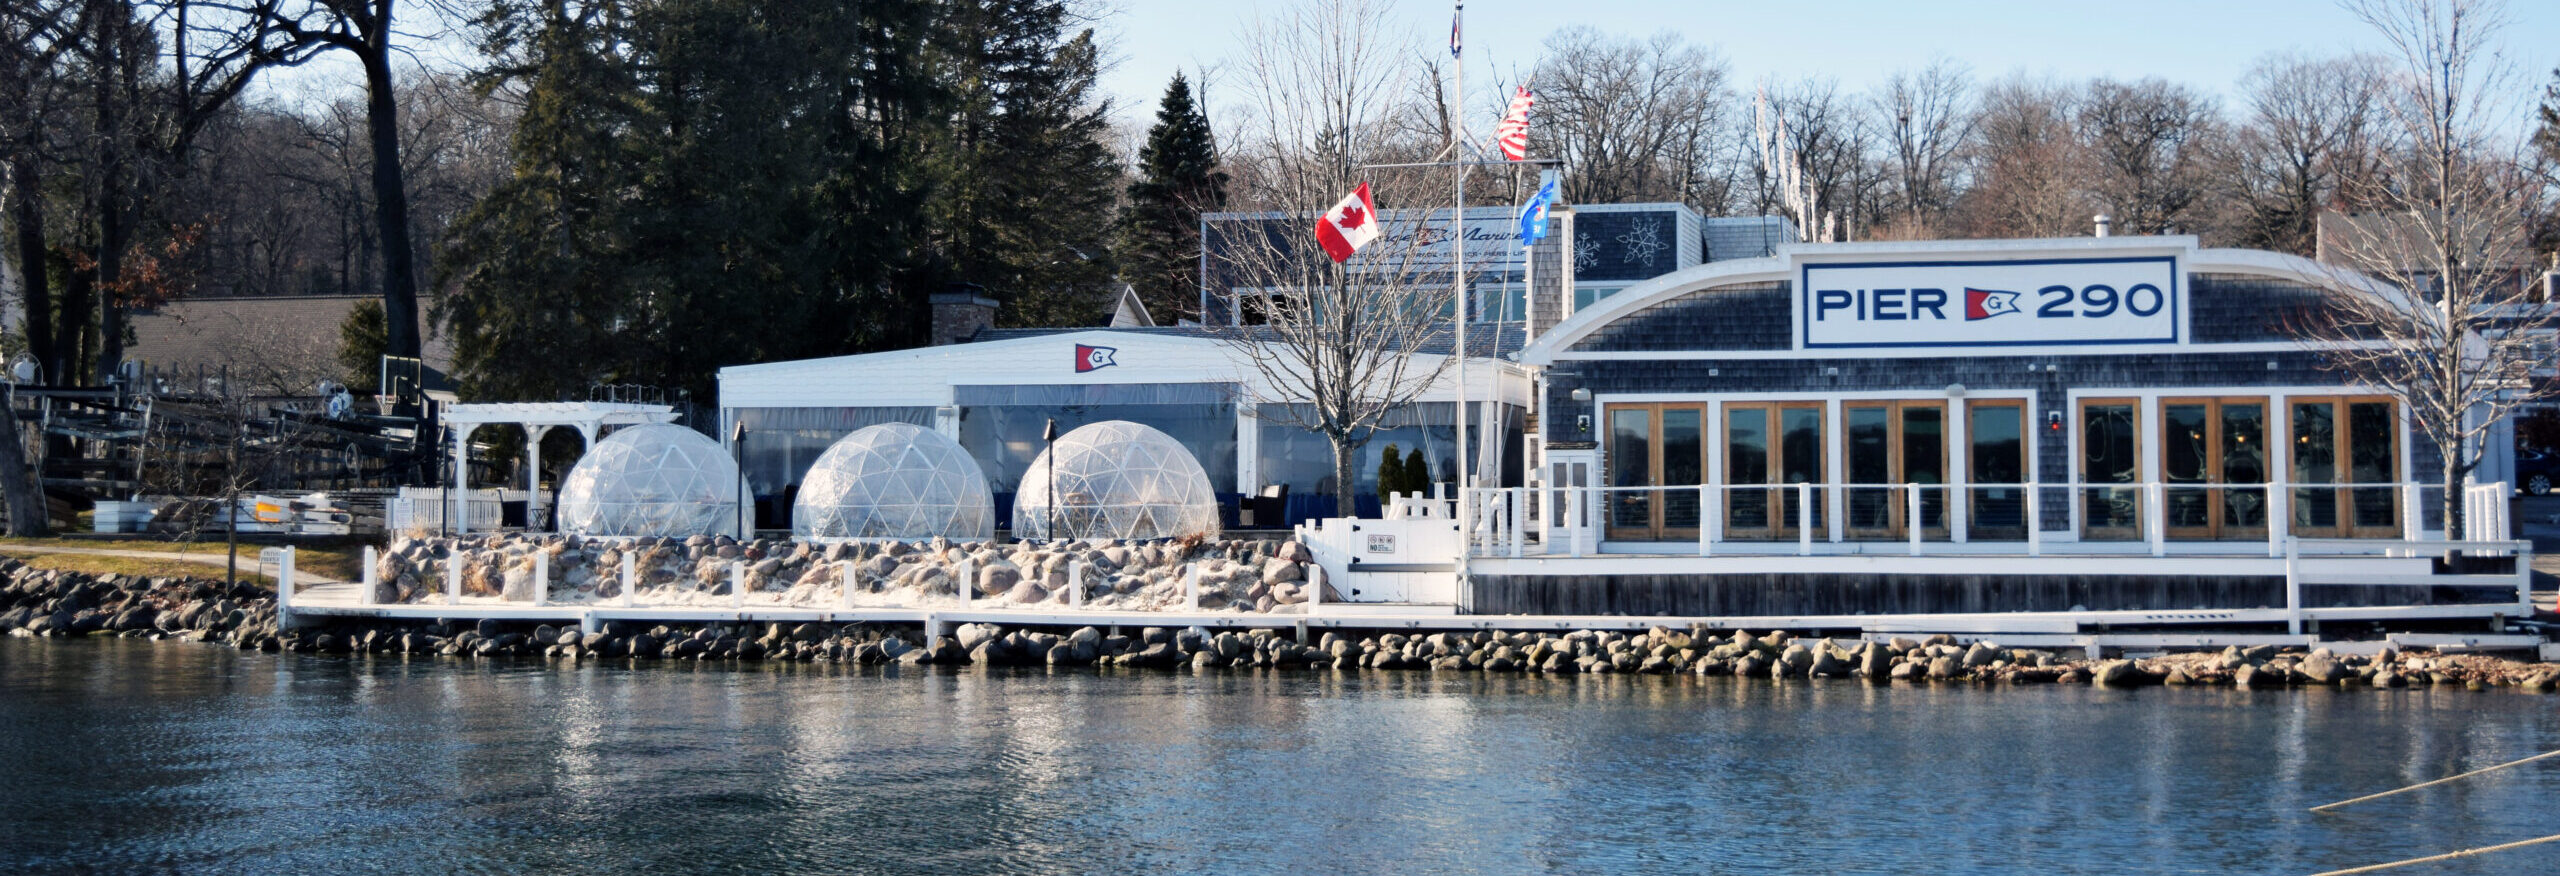 Pier 290 lakeside with igloos